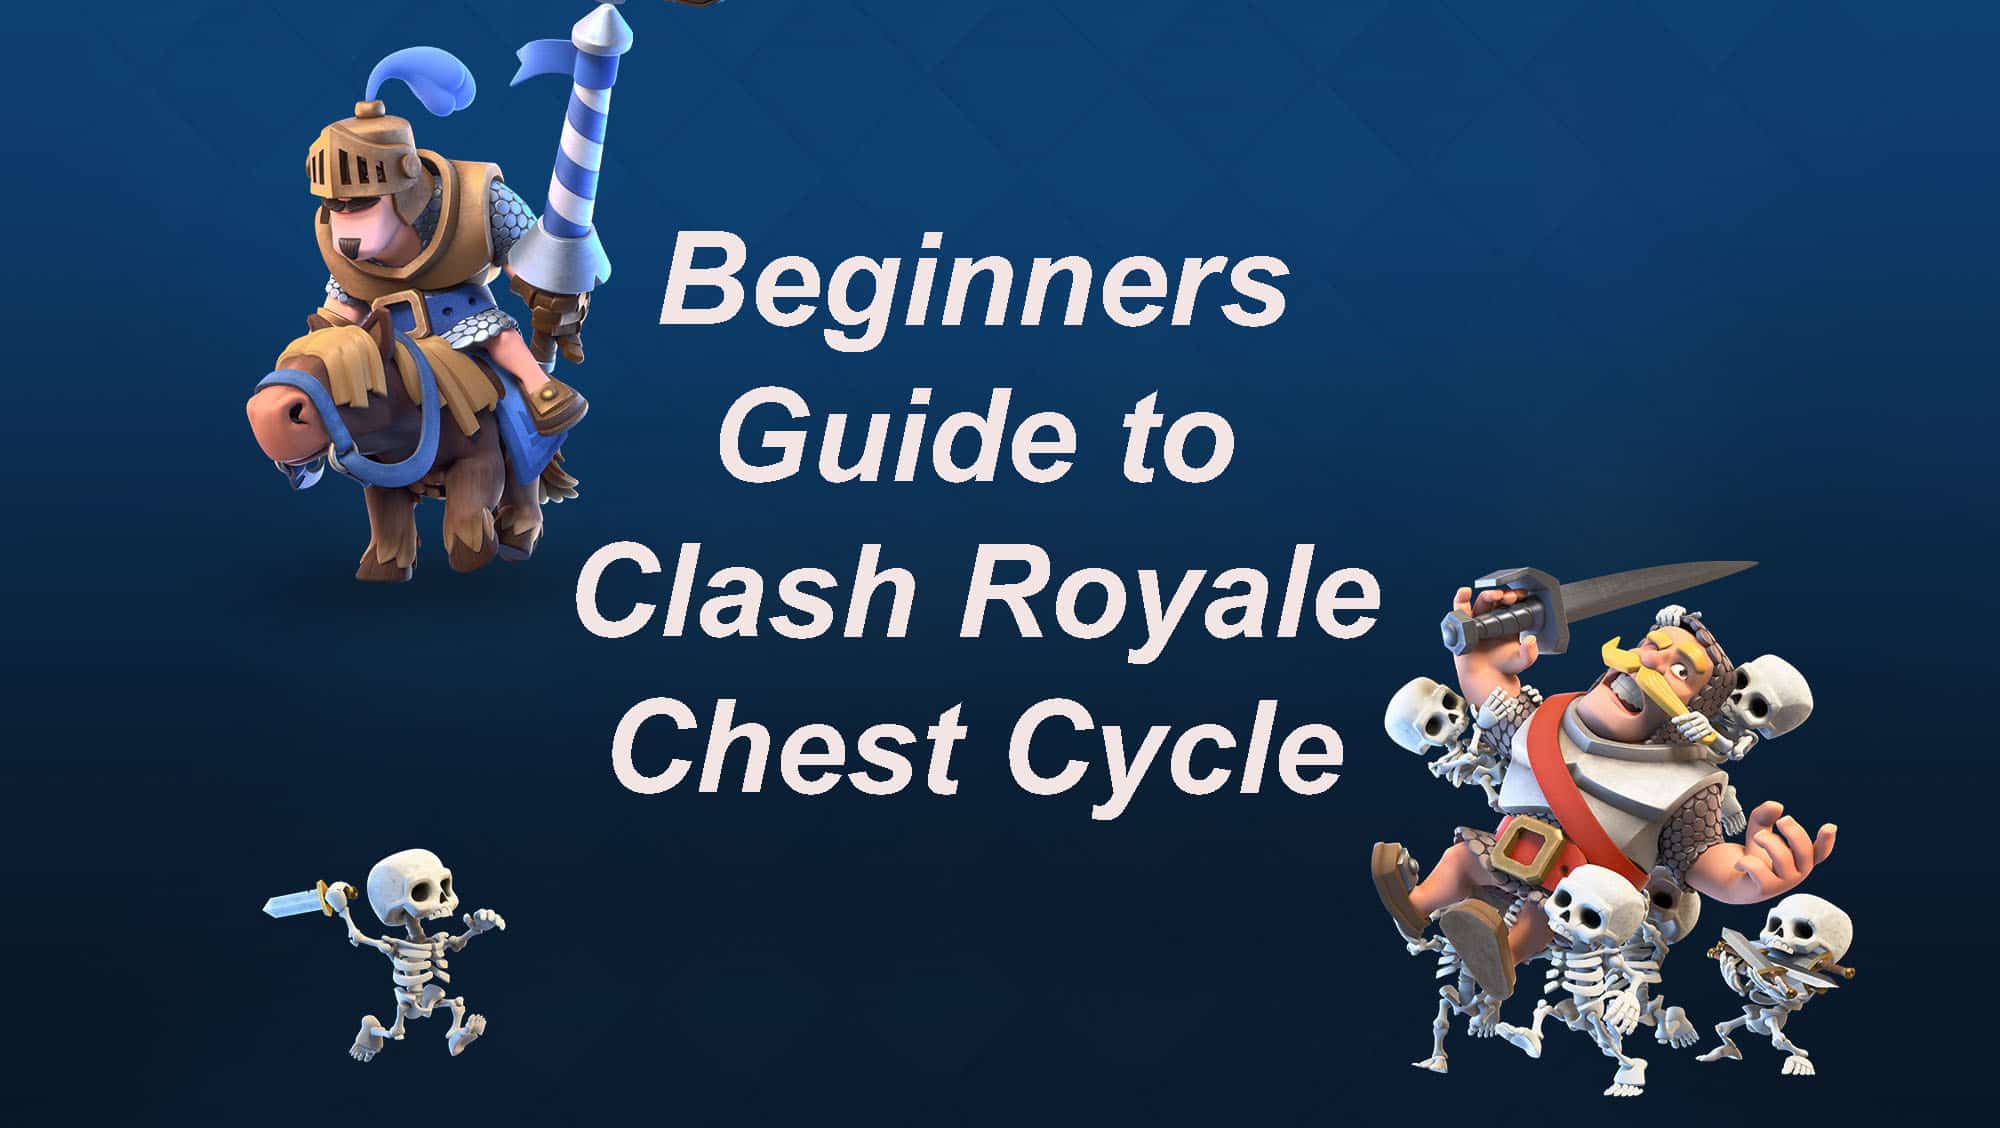 Clash royale chest cycle beginners guide